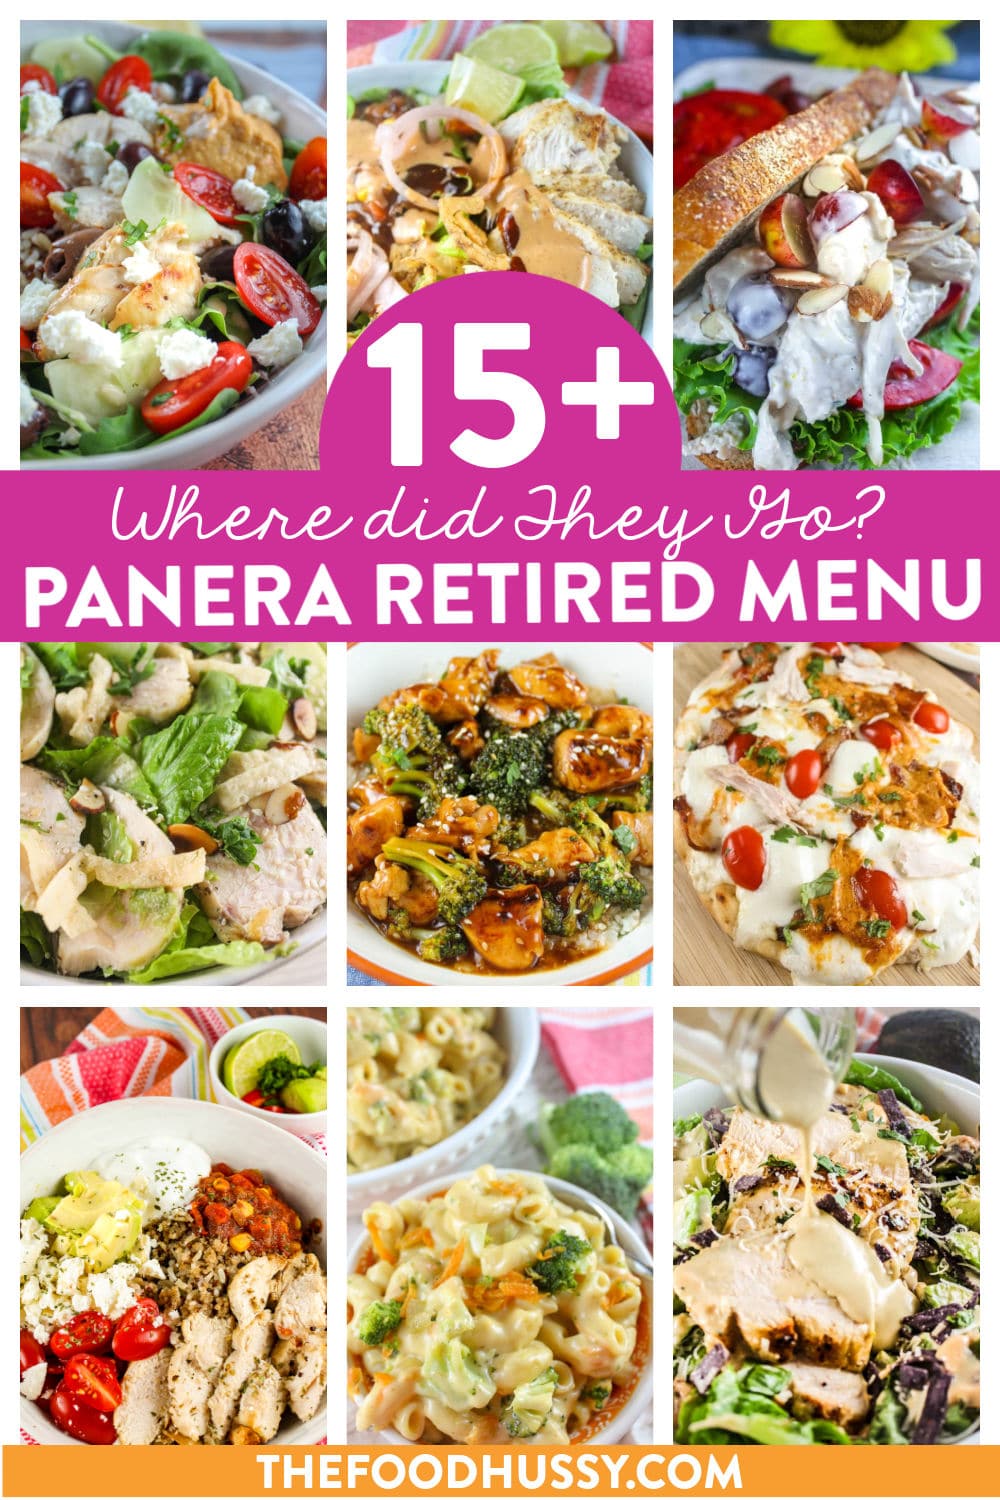 Panera Bread went live with a new menu - but here you can find all the Panera Recipes No Longer on the Menu! via @foodhussy